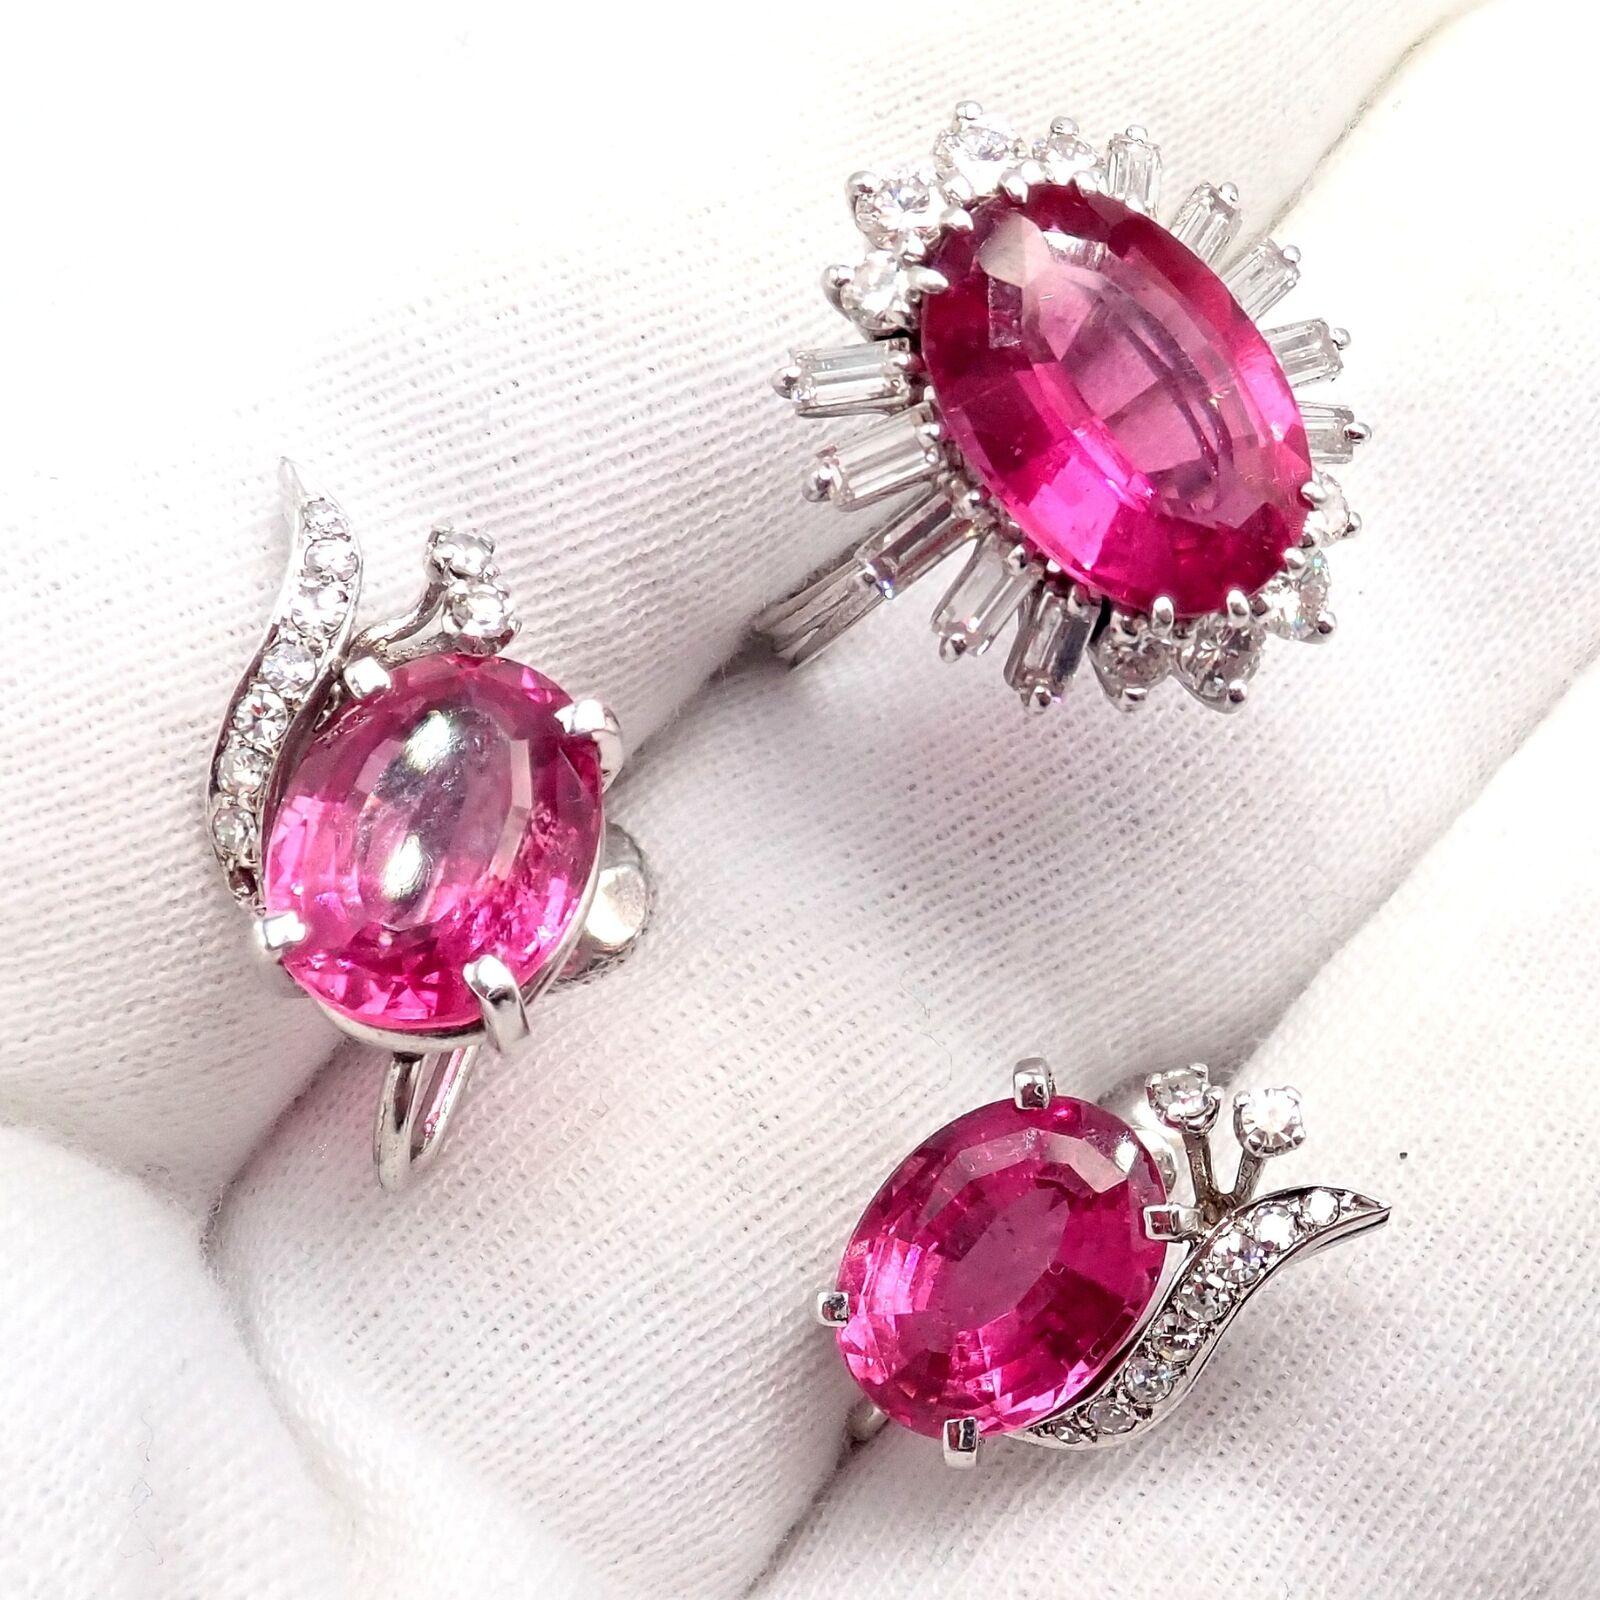 H. Stern Diamond Pink Tourmaline White Gold Ring And Earrings Set For Sale 6